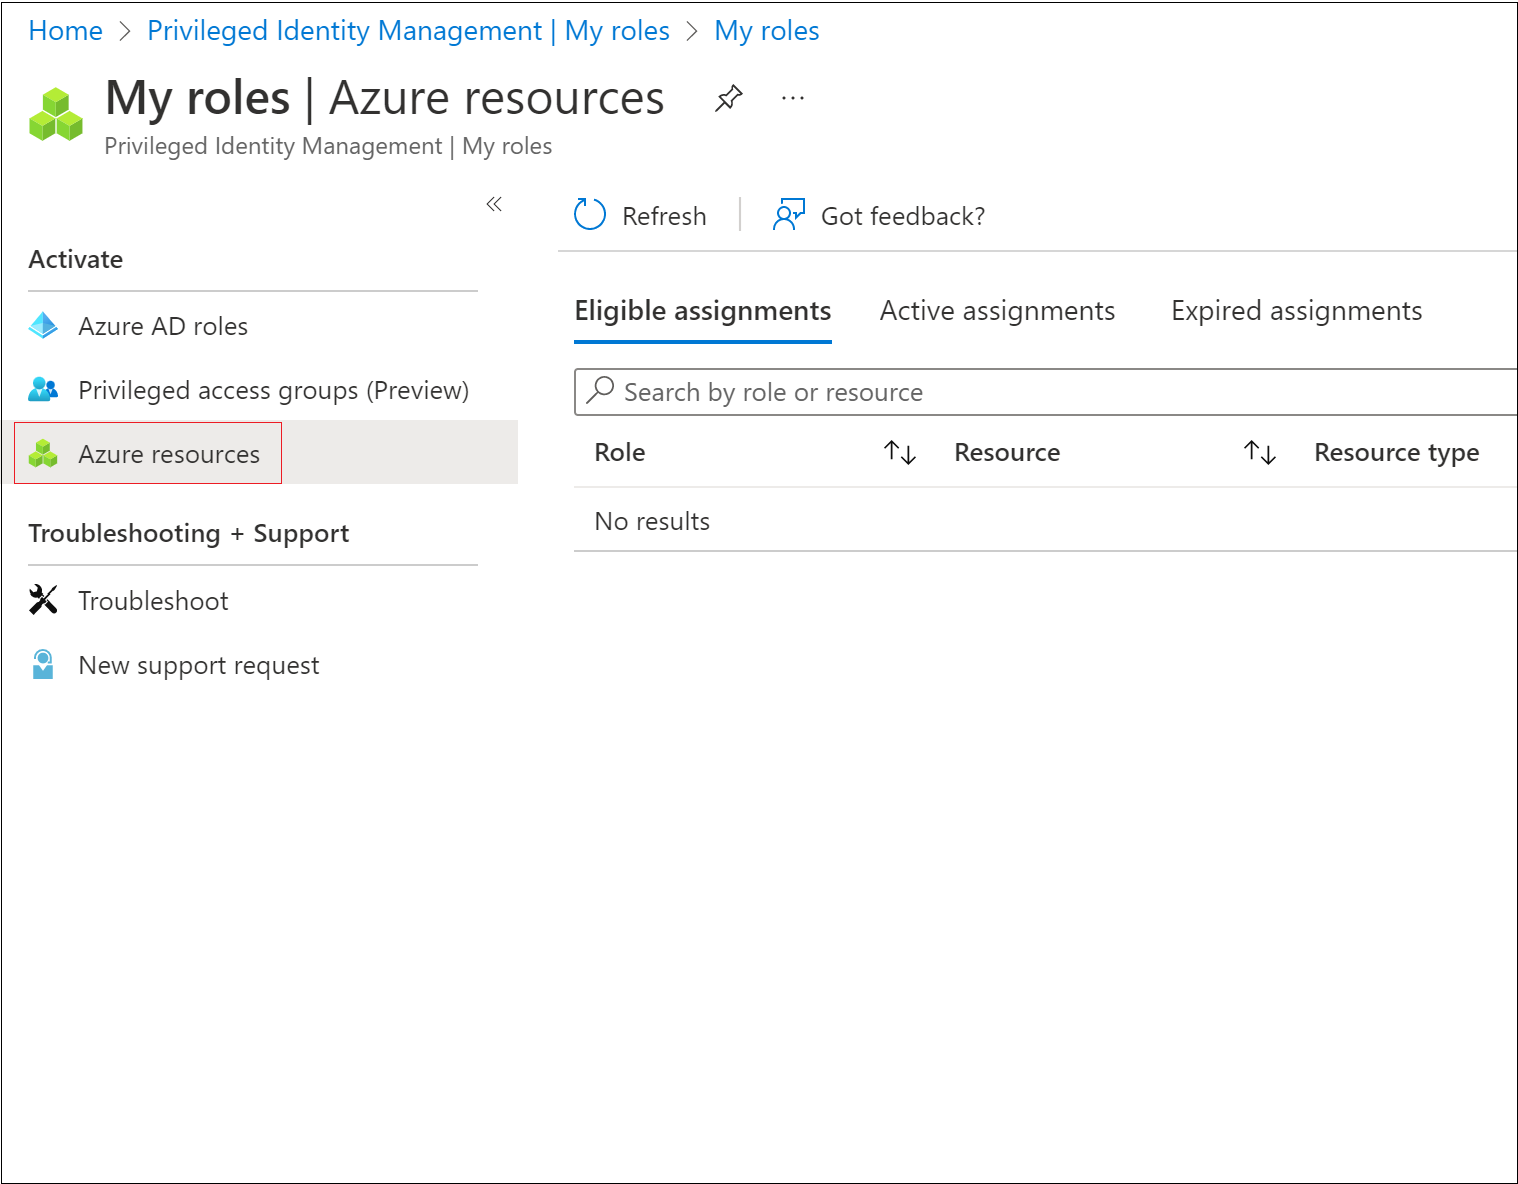 Screenshot of My roles - Azure resource roles page.